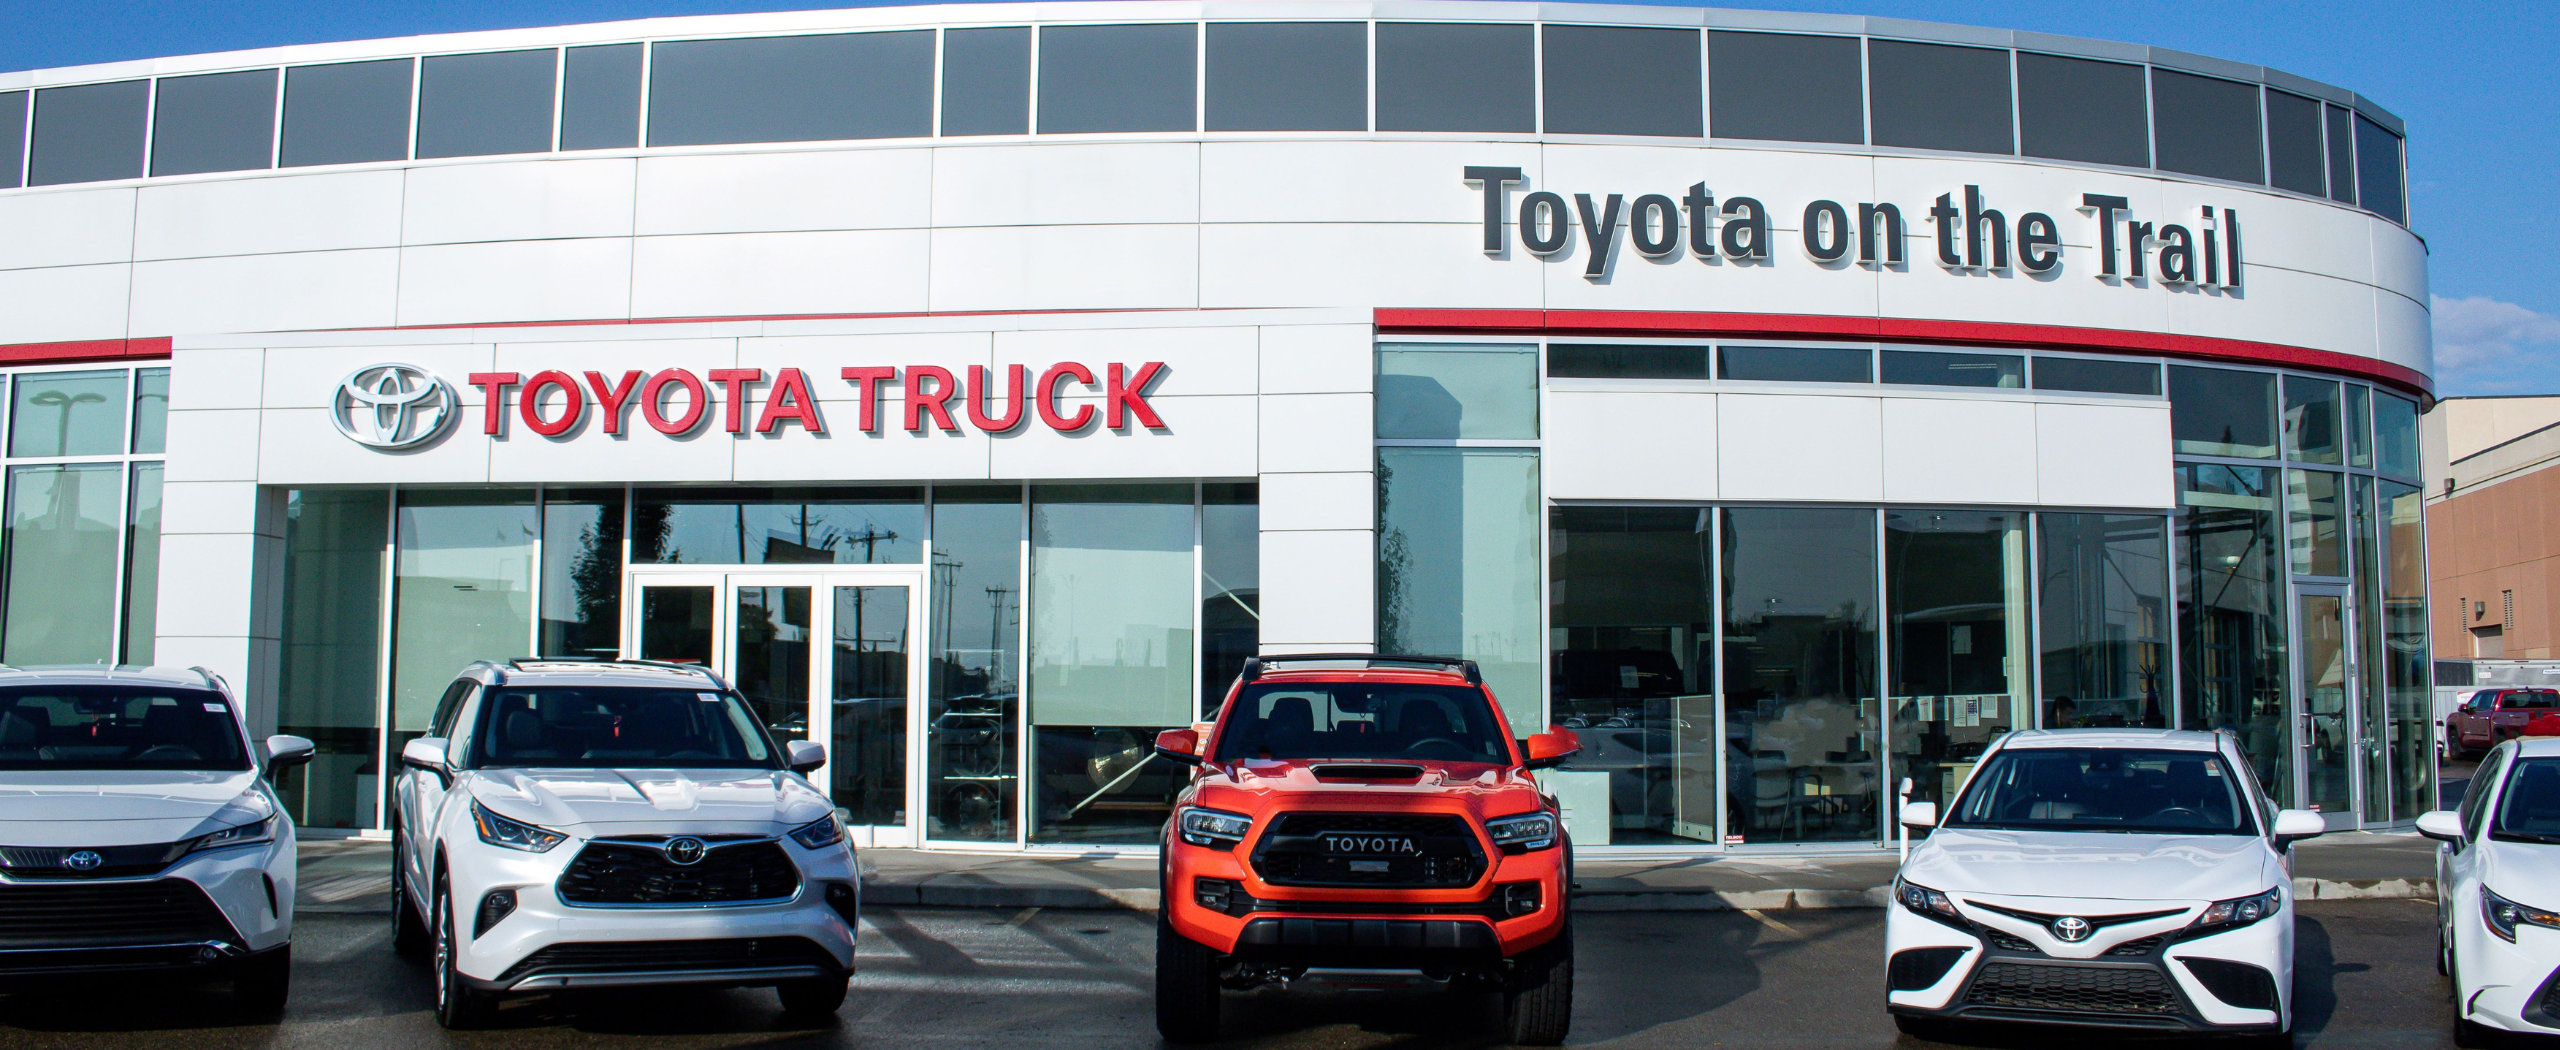 The outside of Toyota on the Trail car dealership in Edmonton. It has multiple Toyotas parked in front of it.